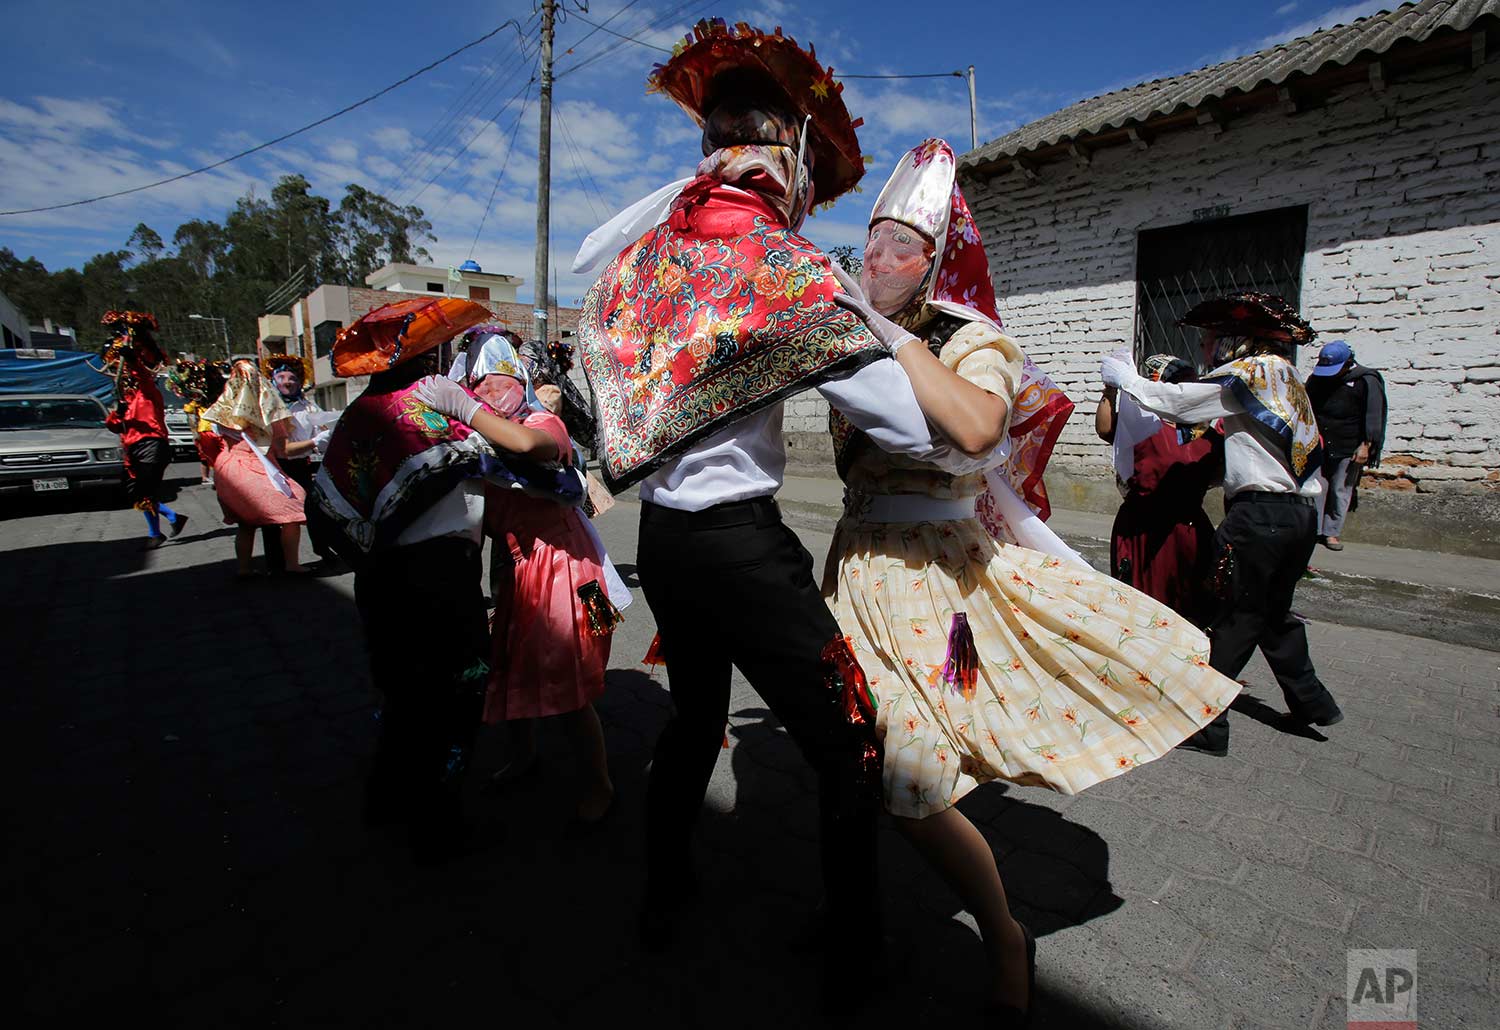  Couples representing the more affluent line dance during the traditional New Year's festival known as "La Diablada", in Pillaro, Ecuador, Friday, Jan. 5, 2018. (AP Photo/Dolores Ochoa) 